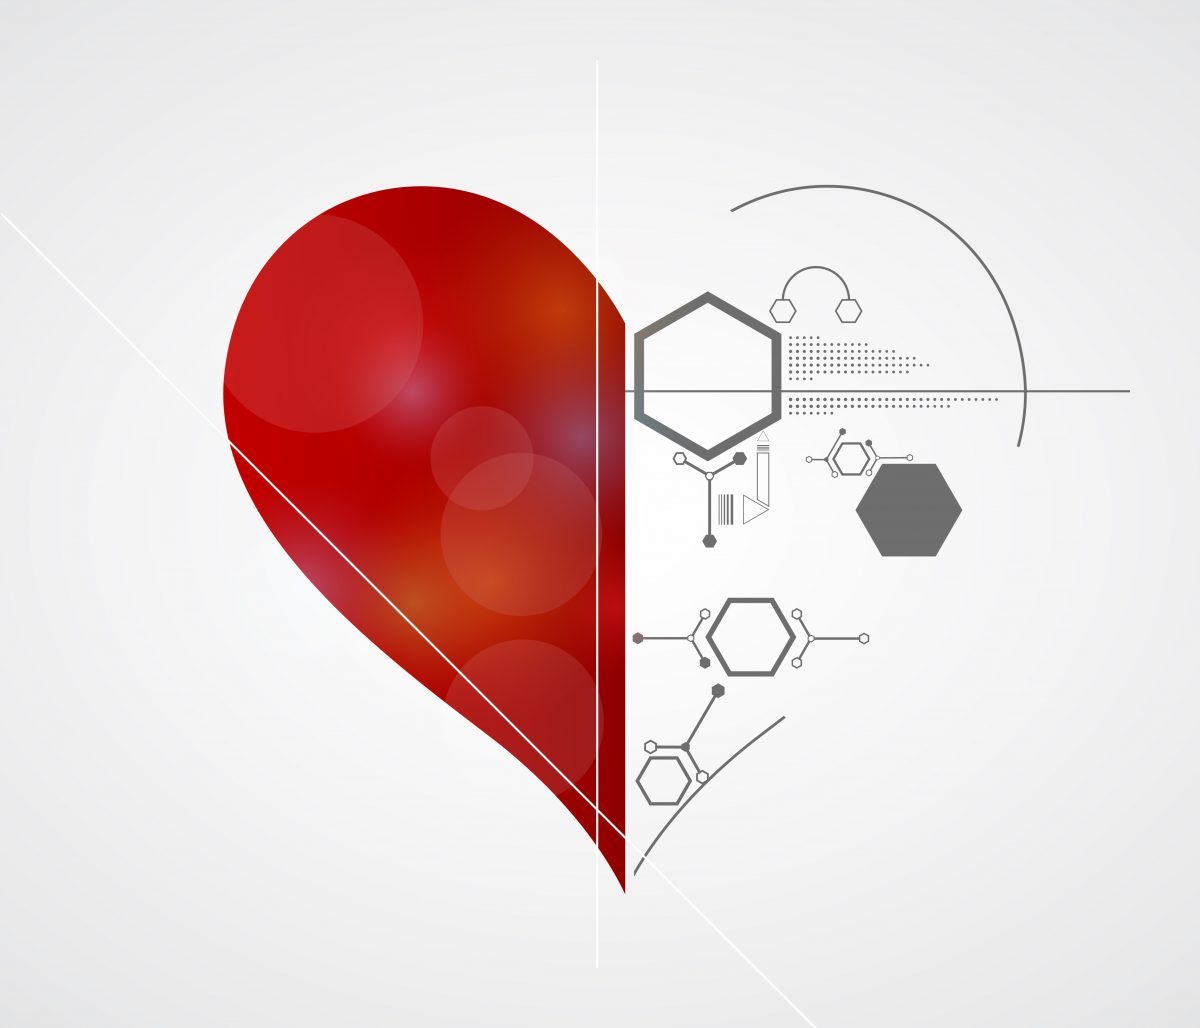 Putting the heart into software development